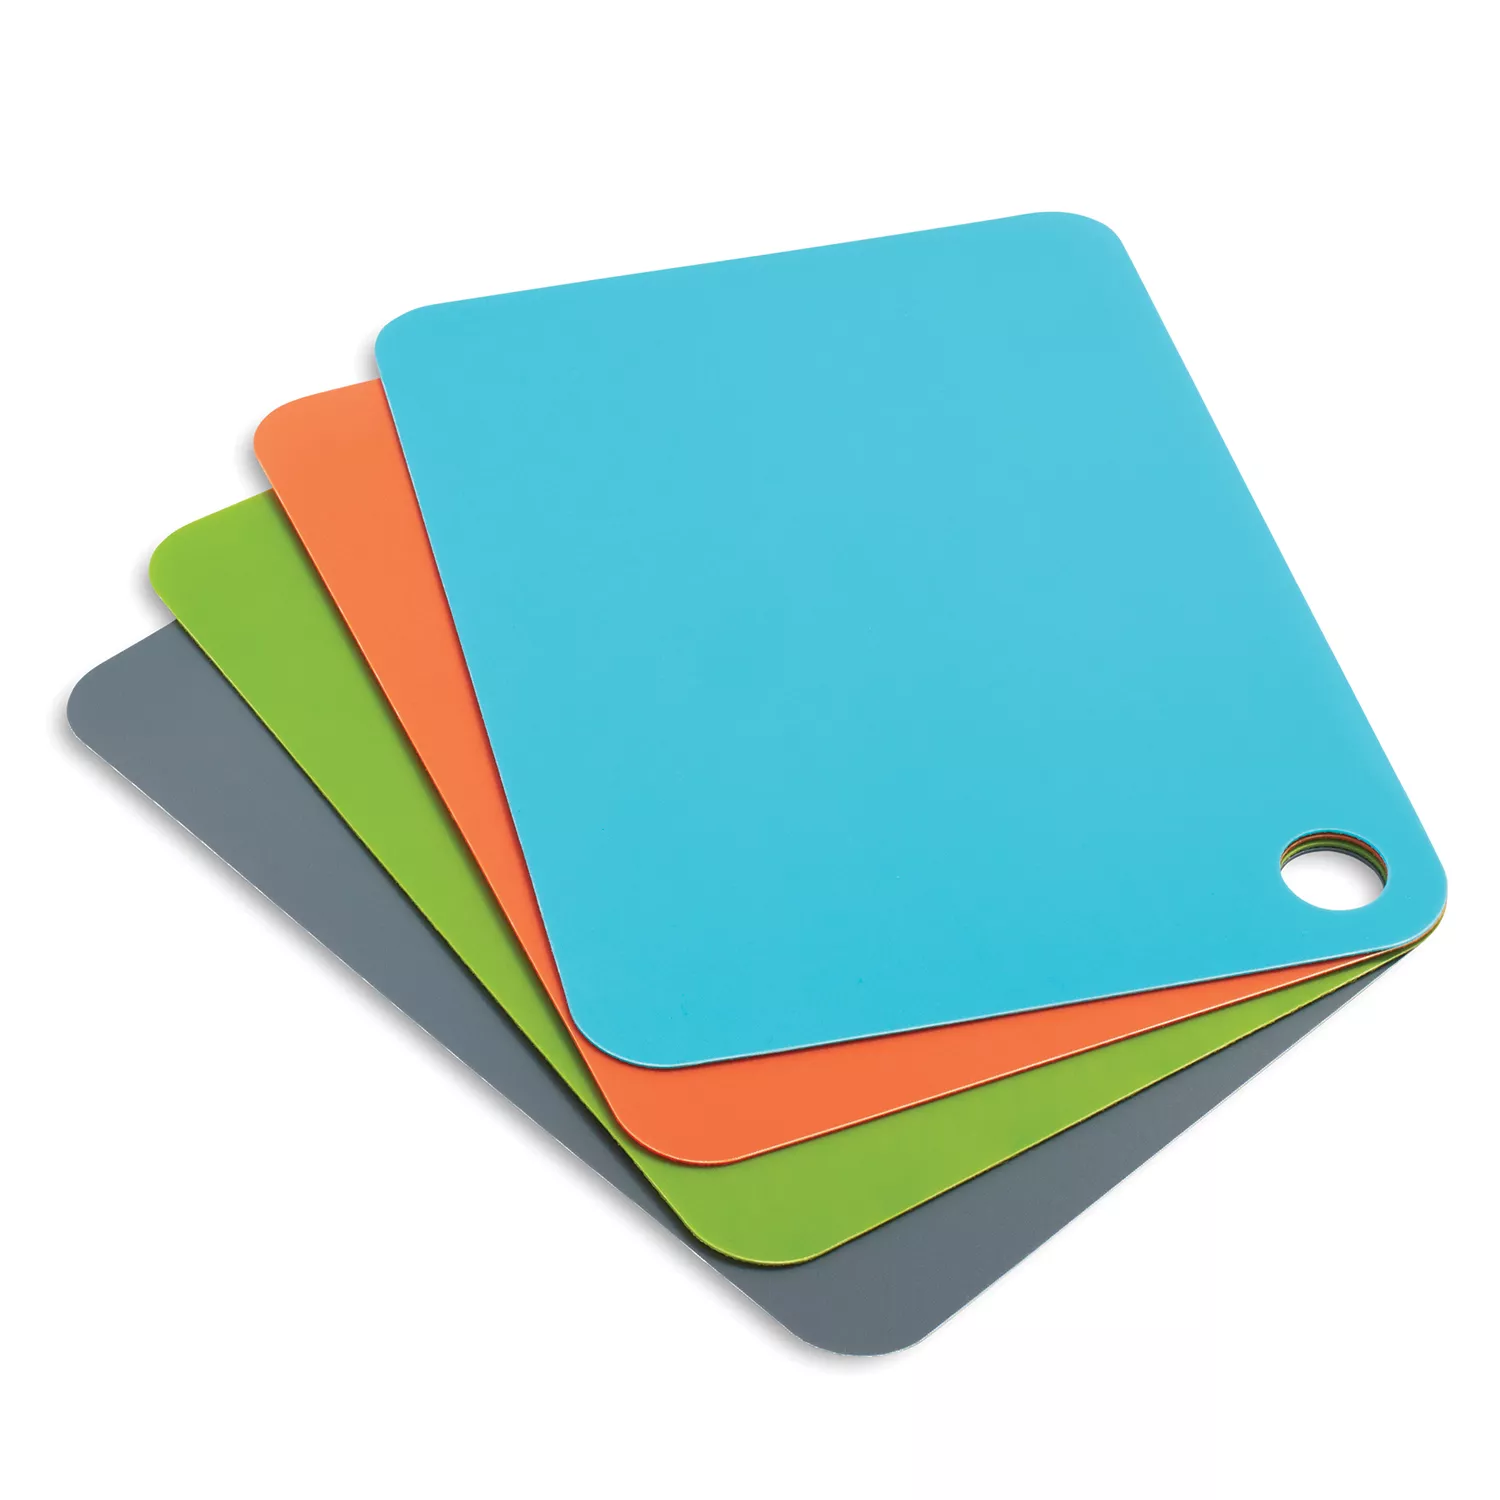 Tablecraft 10355 Flexible Cutting Board, Assorted Color, Pack of 4, 12 x 8, Multi